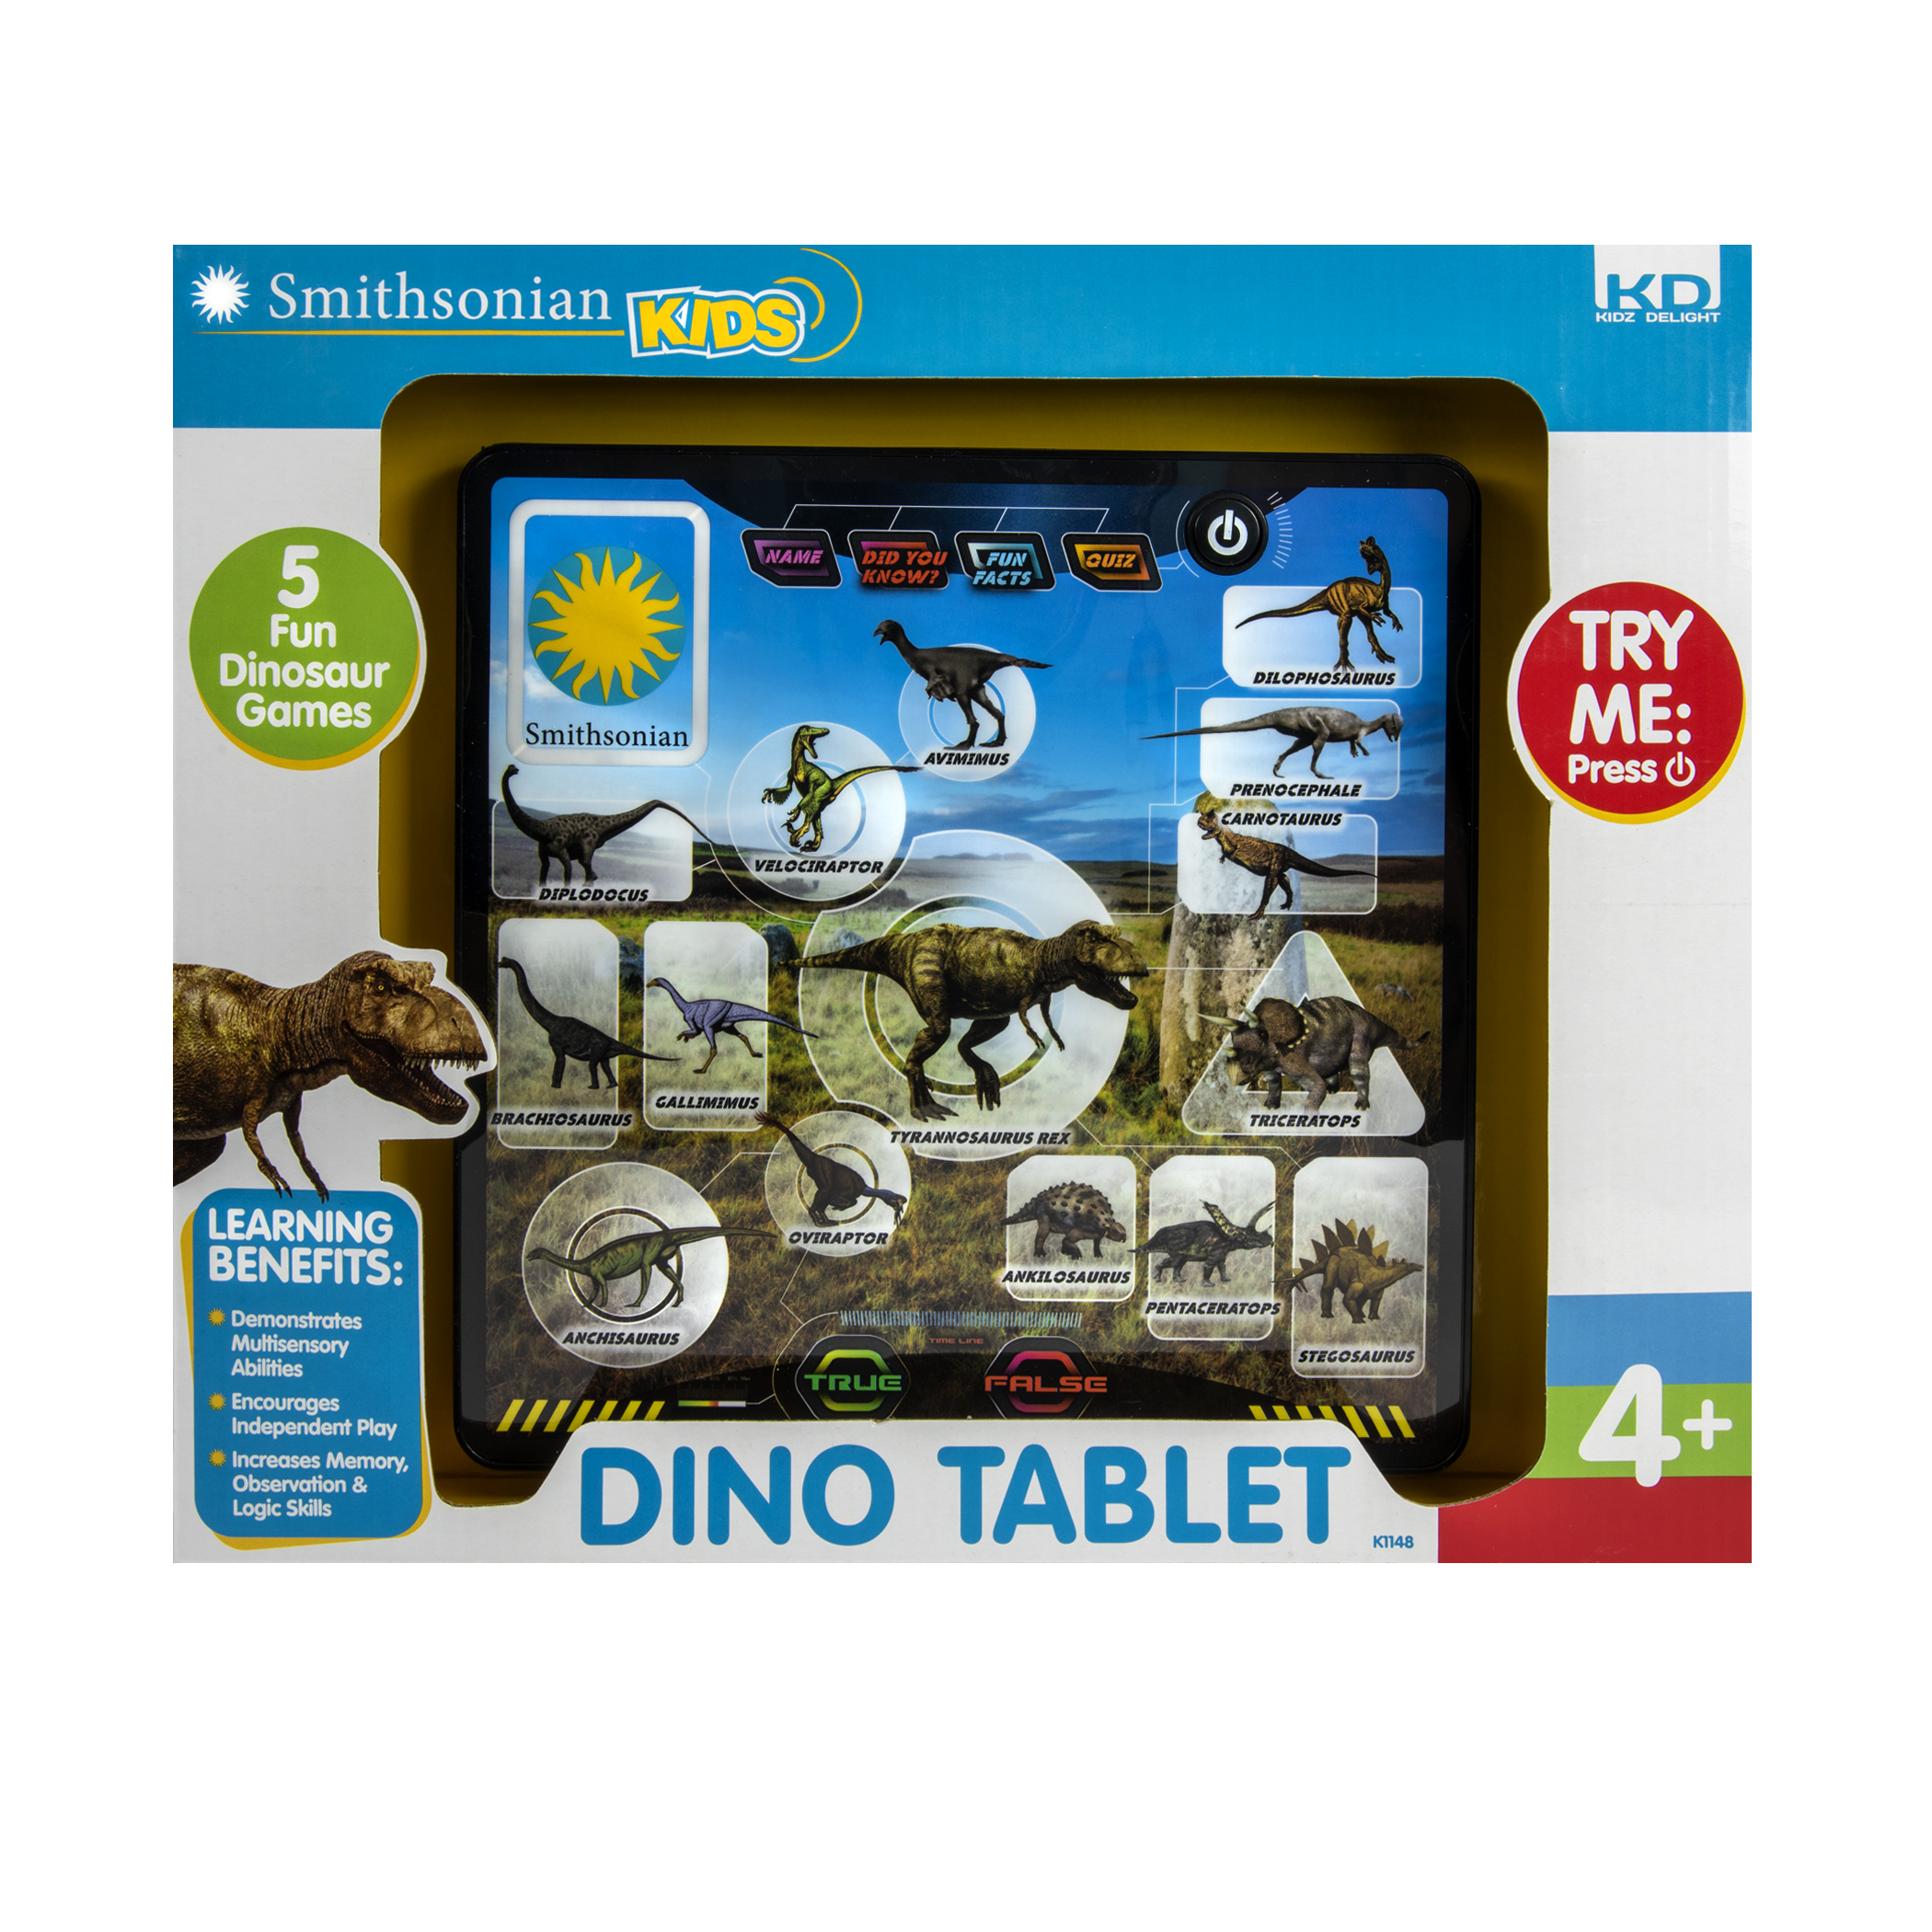 Kidz Delight Smithsonian Kids' Dino Toy Tablet- Learn about Dino's for Children Ages 3 Years and up - image 1 of 3